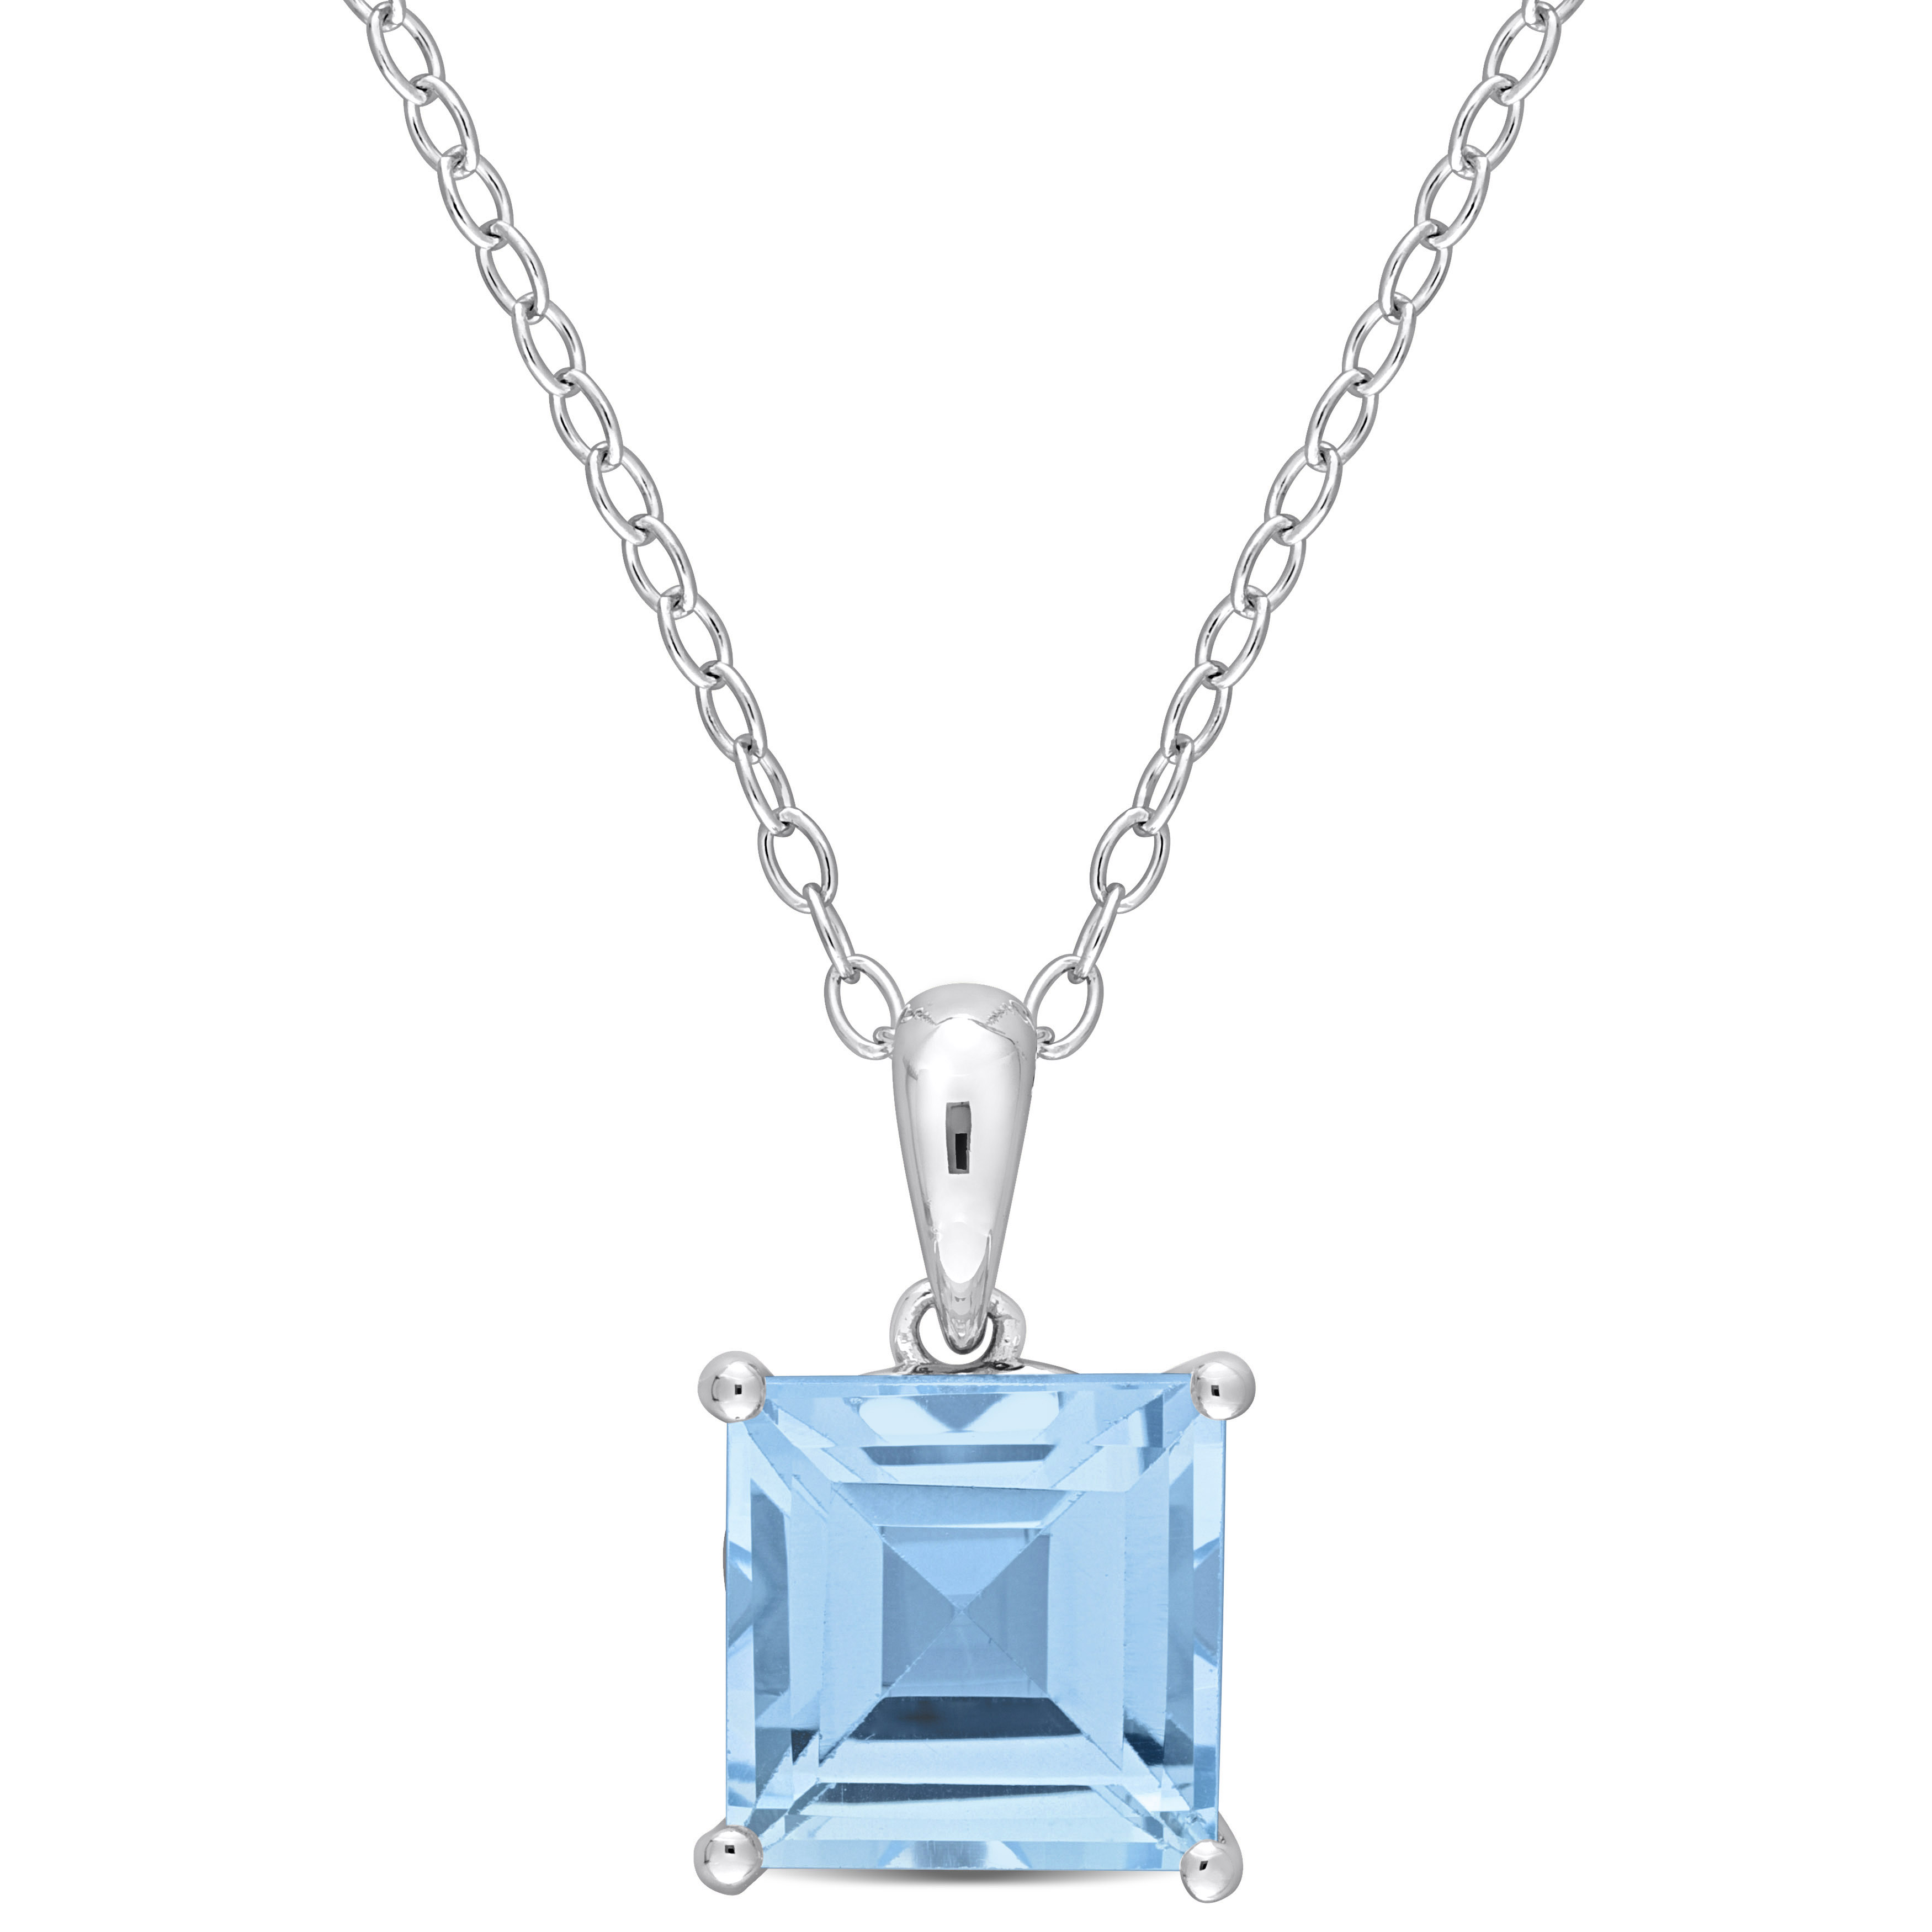 3 CT TGW Princess Cut Sky Blue Topaz Solitaire Heart Design Pendant with Chain in Sterling Silver - 18 in.